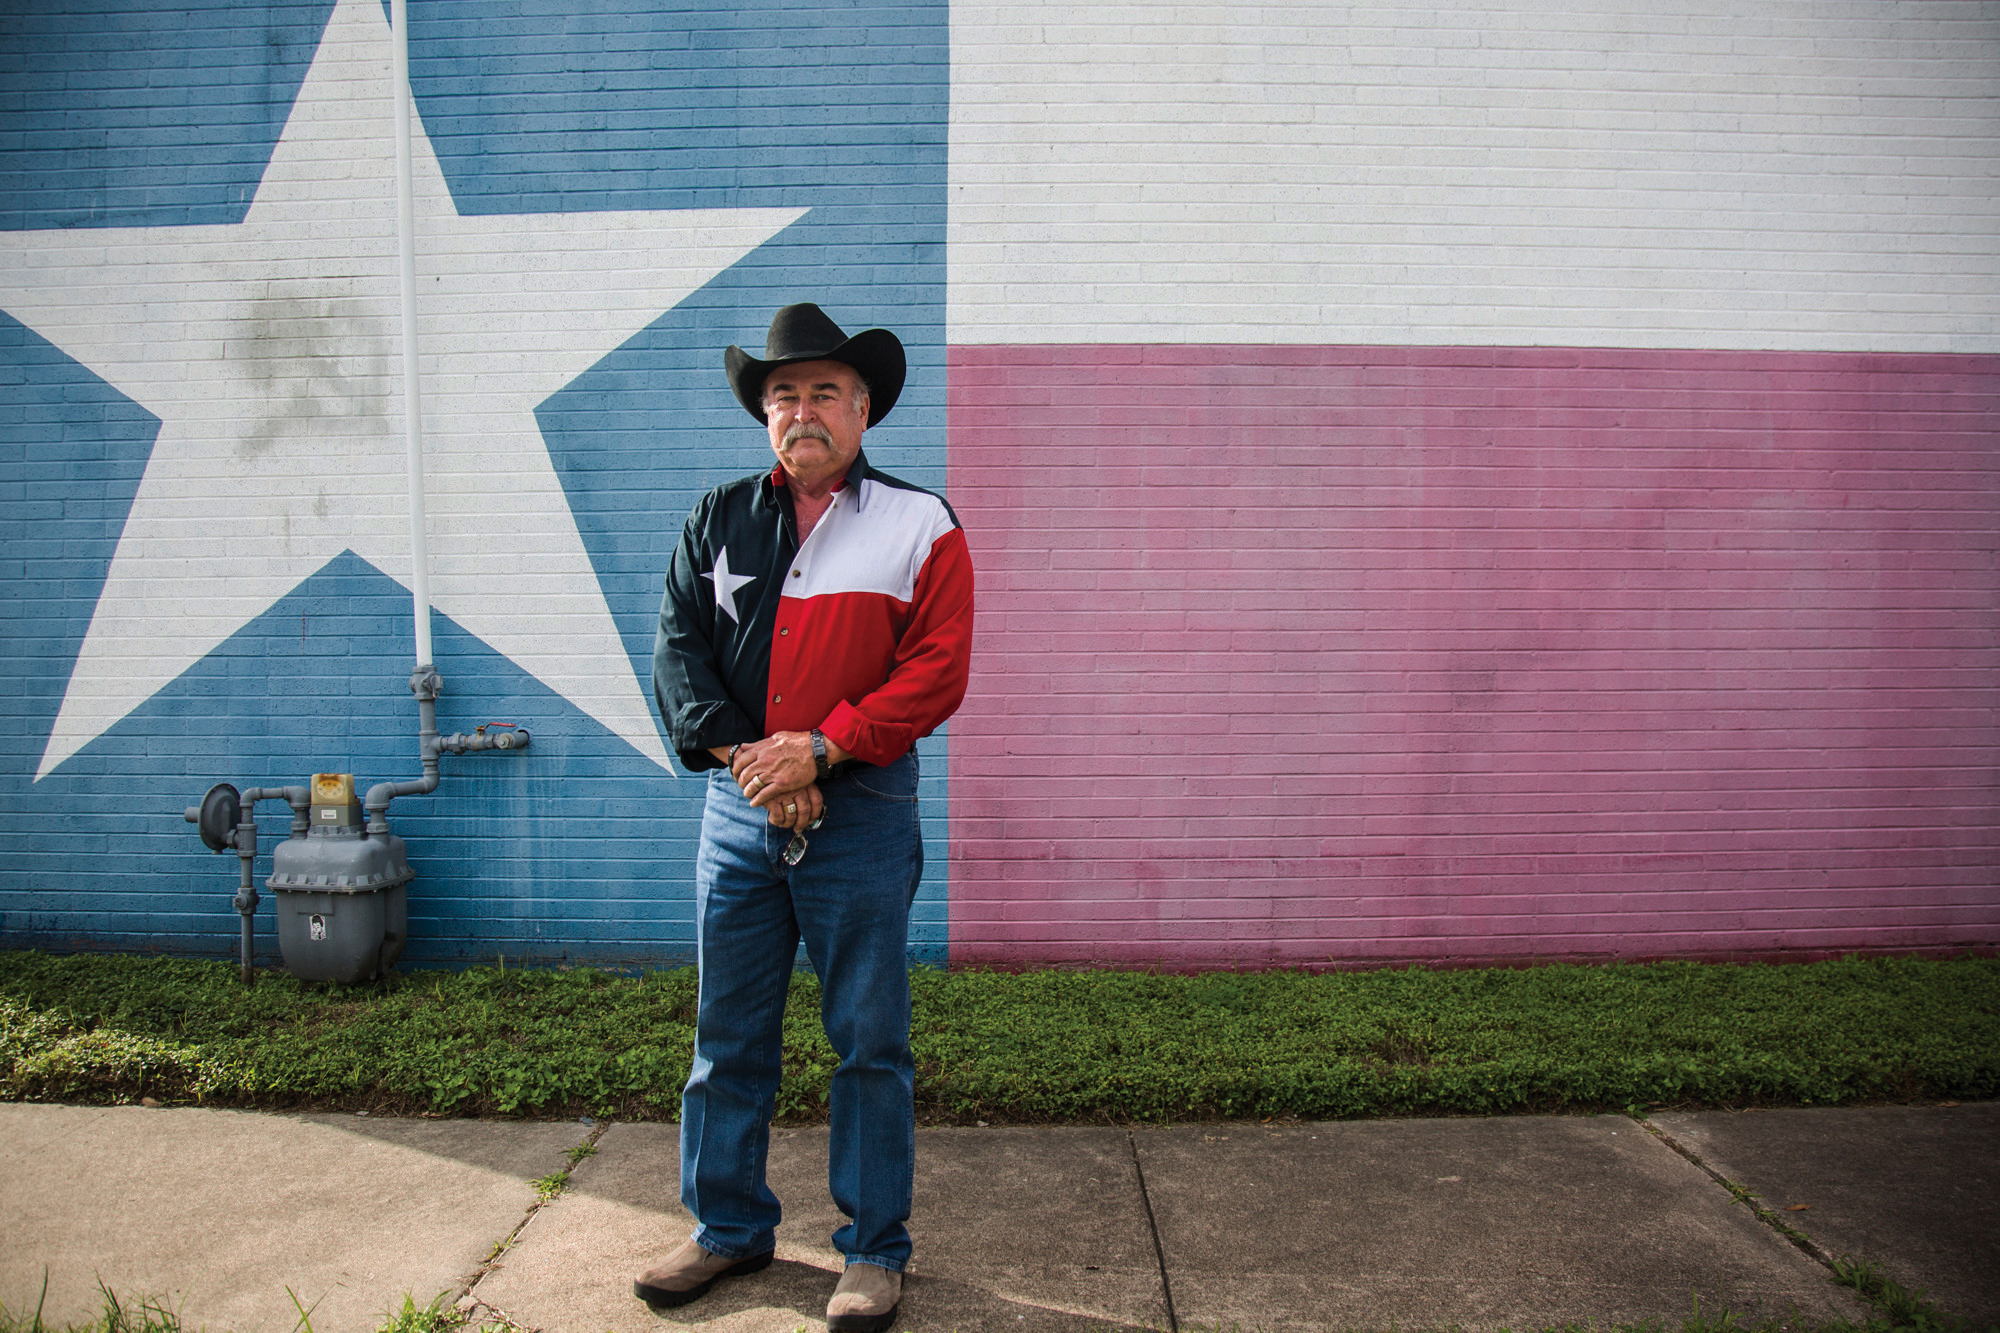  Thomas Smith, 66, stands in front of a Texas flag wall painting with a matching Texas flag shirt waiting for the start of the Veterans Day parade in Victoria, Texas on Nov. 11, 2017. 